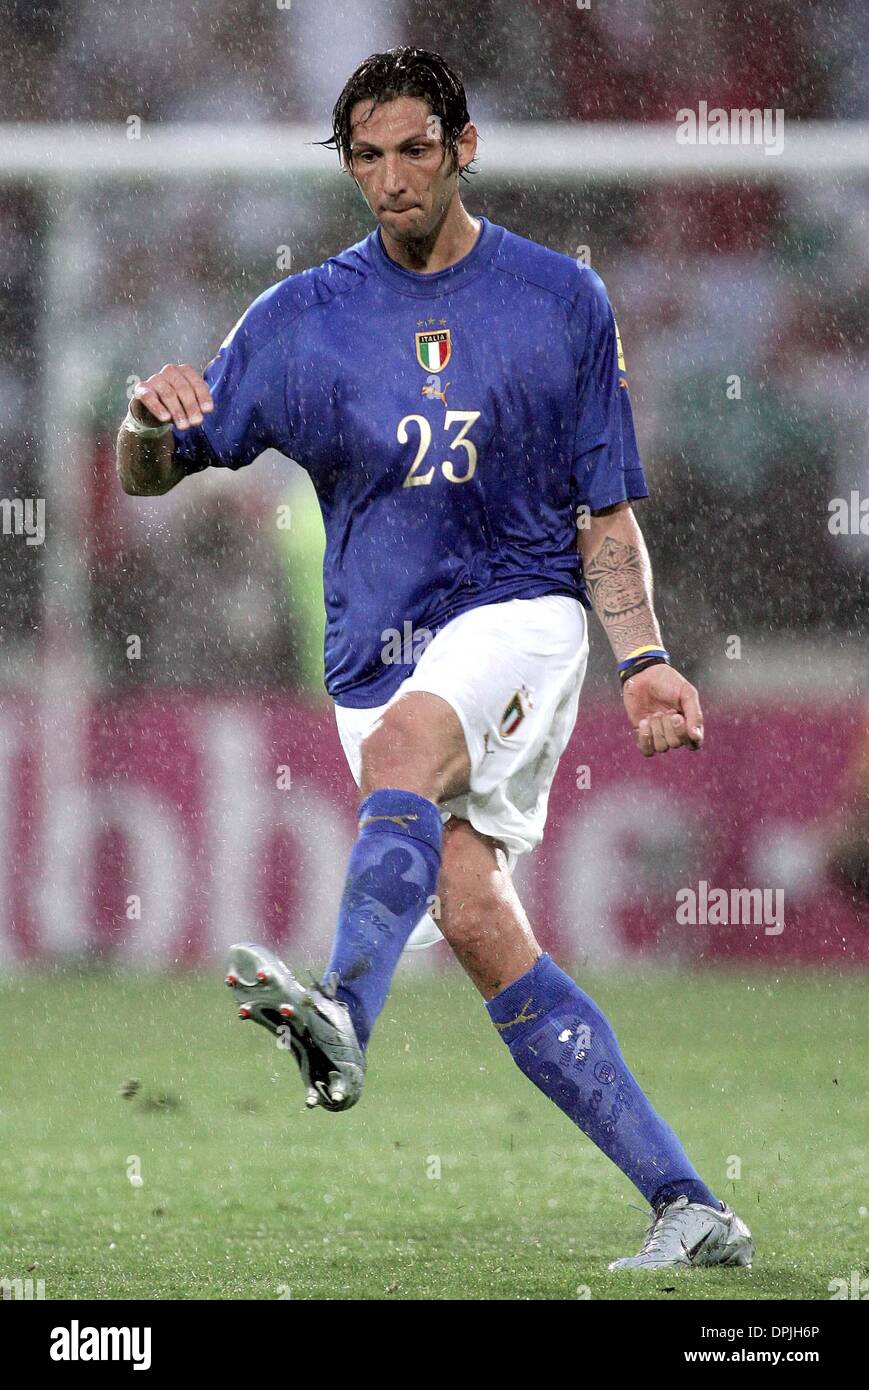 MARCO MATERAZZI.ITALY & INTER MILAN.ITALY V BULGARIA EURO 2004.D. AFONSO HENRIQUES STADIUM, GUIMARAES, PORTUGAL.22/06/2004.DIG24946.K47872.WORLD CUP PREVIEW 2006 Stock Photo